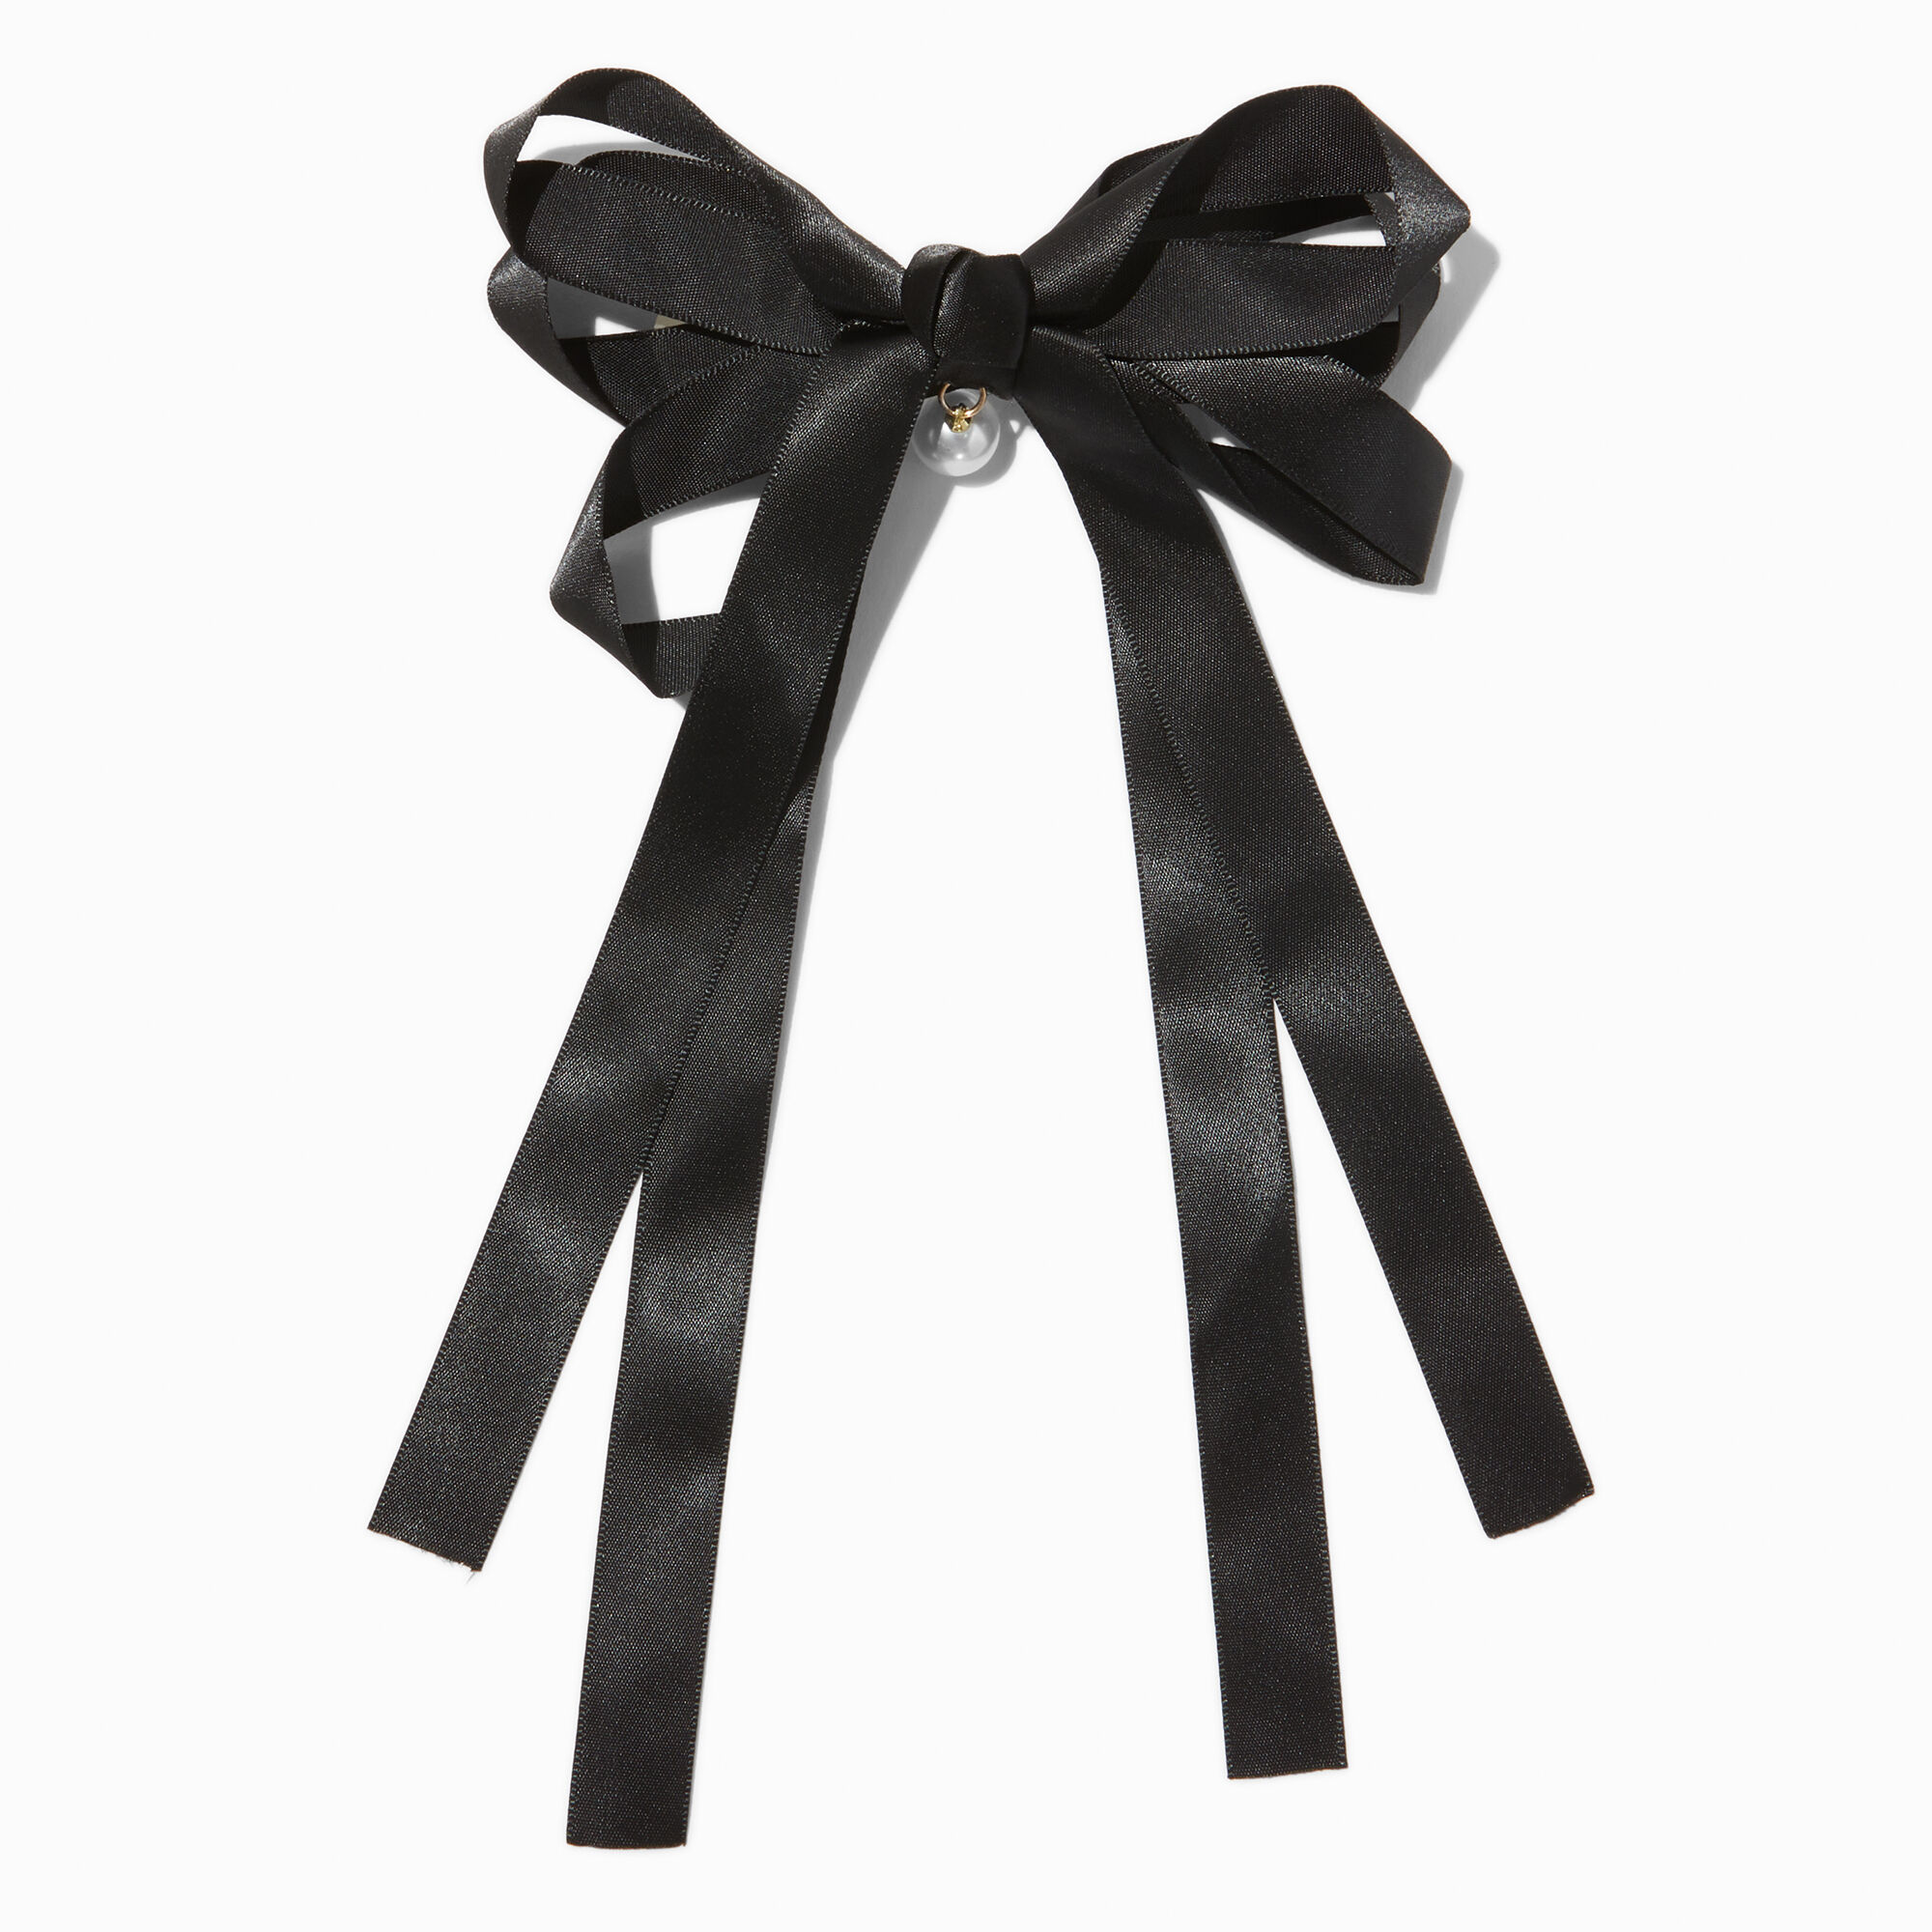 View Claires Satin Pearl Long Tail Bow Hair Clip Black information